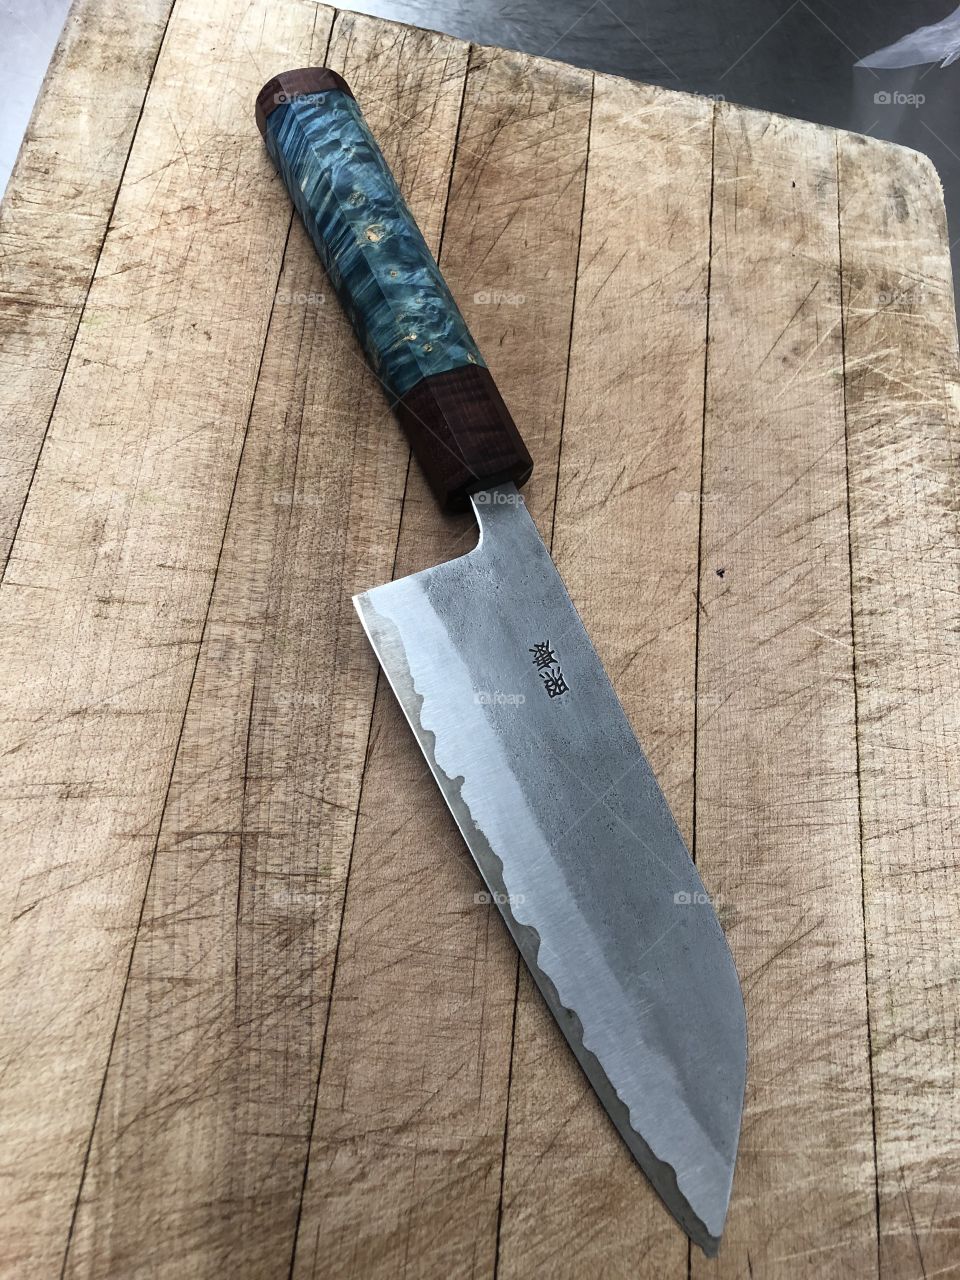 Japanese chef knife hand forged in Japan